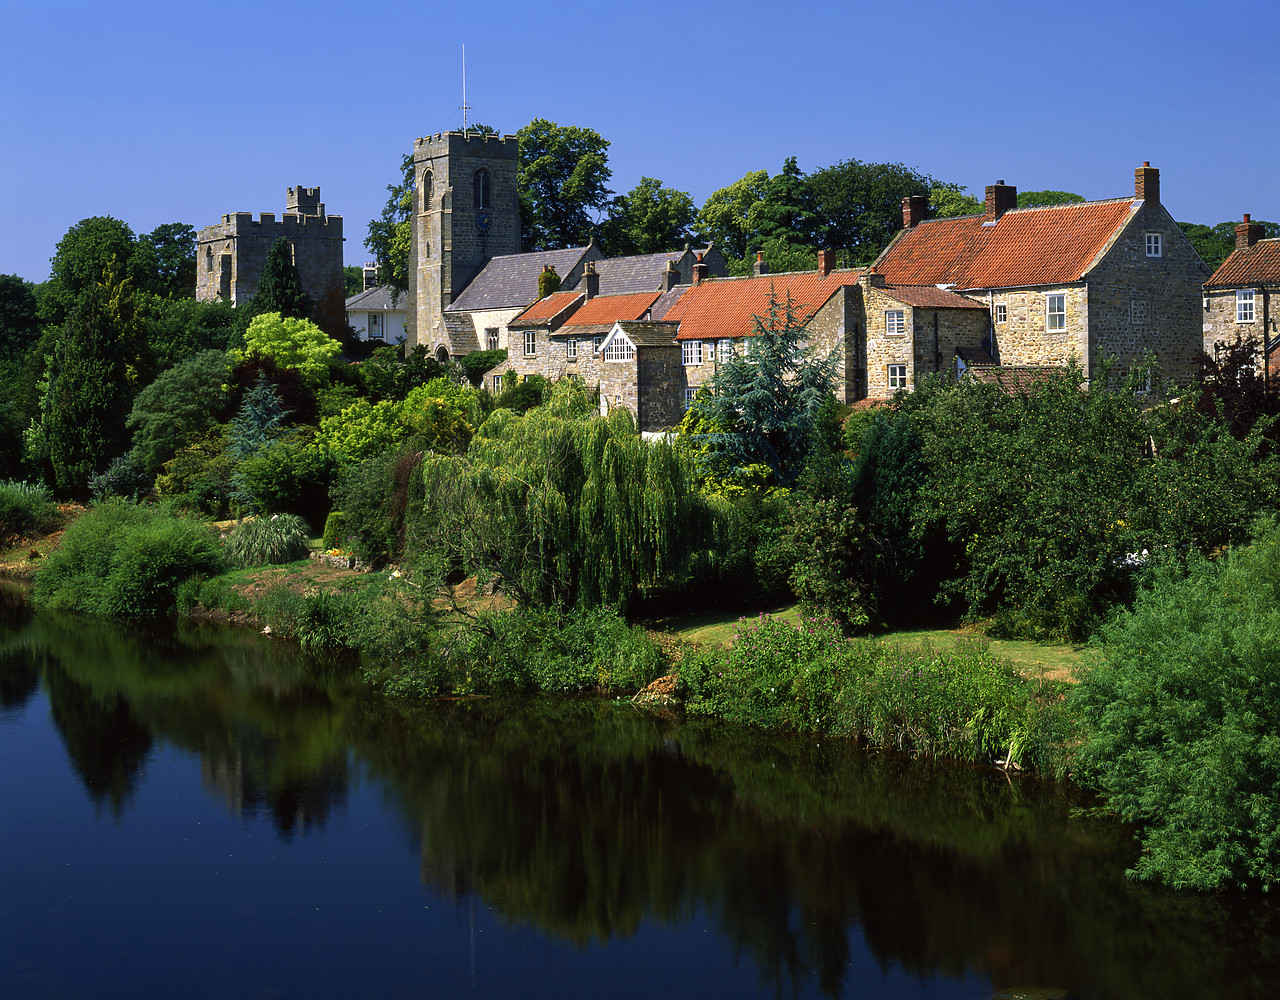 #060780-1 - Marmion Tower & Church, West Tanfield seen over River Ure, North Yorkshire, England